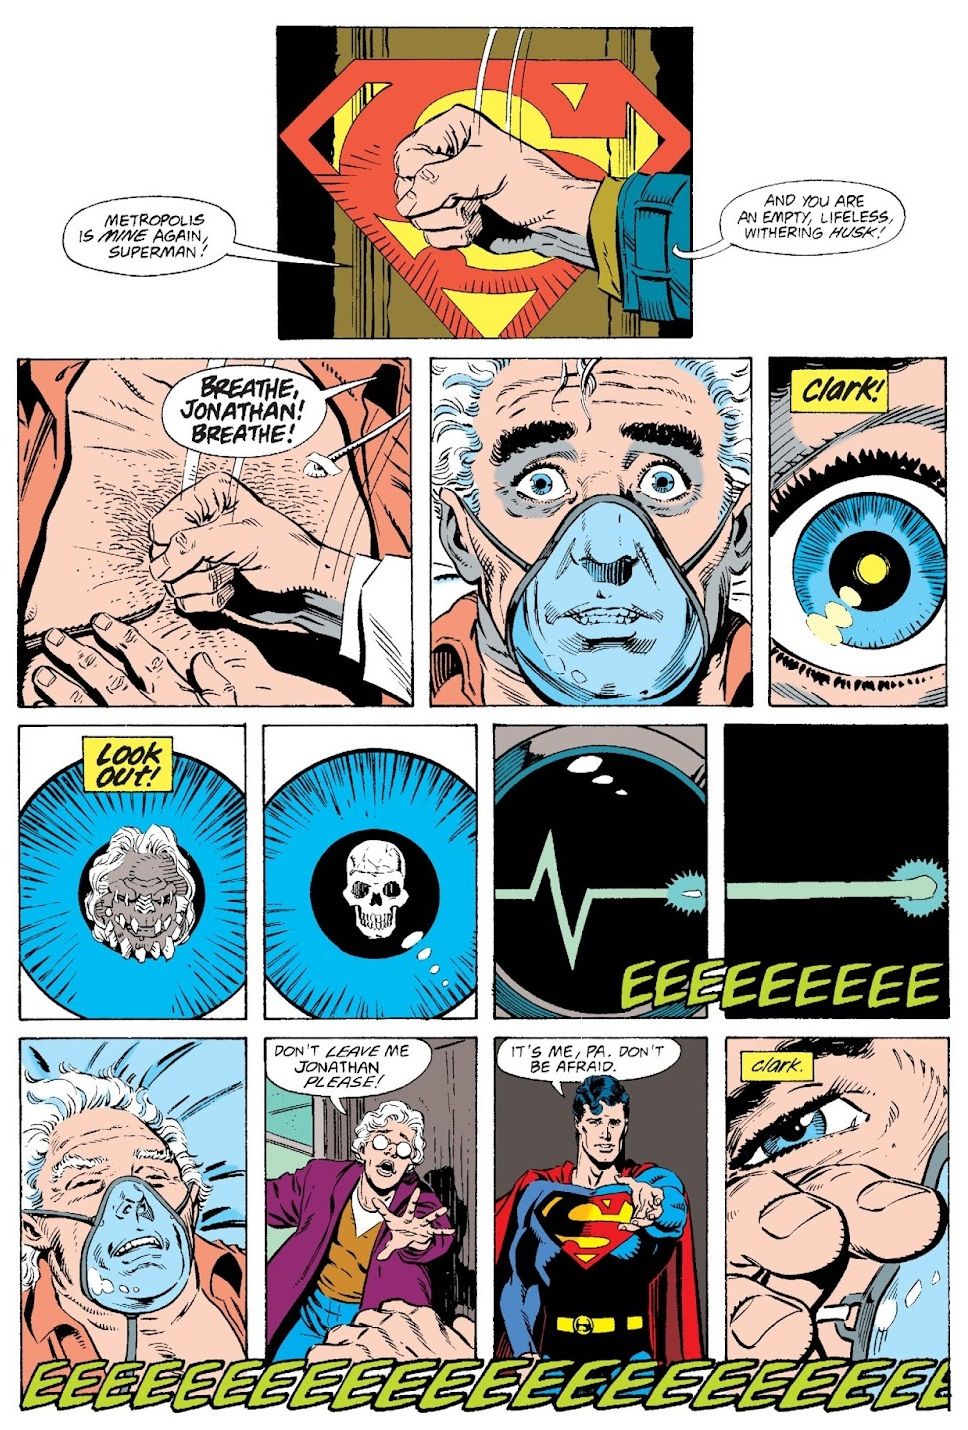 Lex Luthor lords over Superman's dead body as Superman's father flatlines